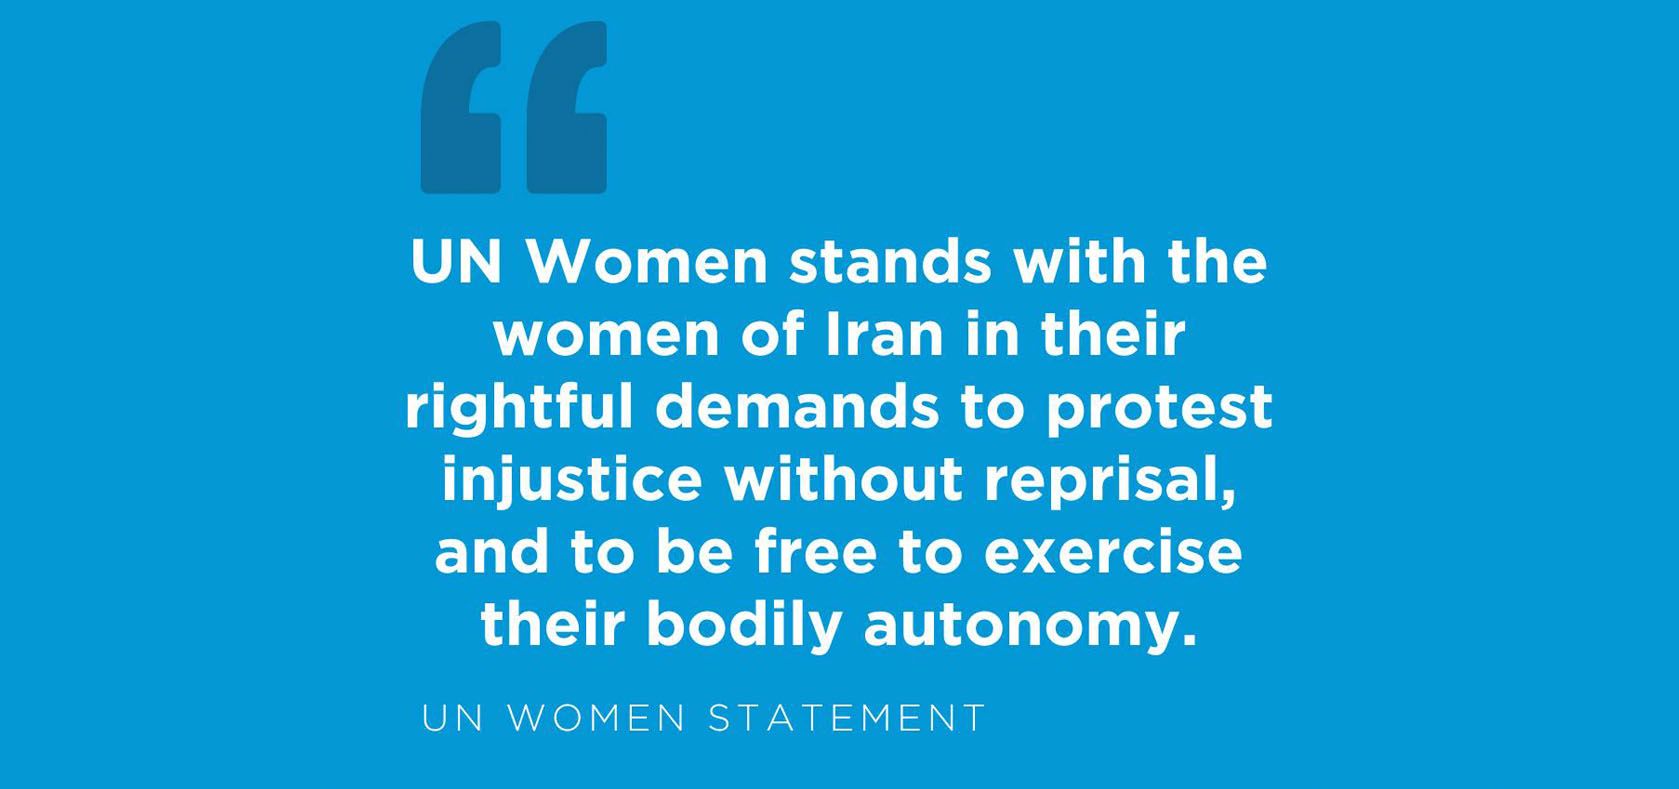 UN Women stands with the women of Iran in their rightful demands to protest injustice without reprisal, and to be free to exercise their bodily autonomy